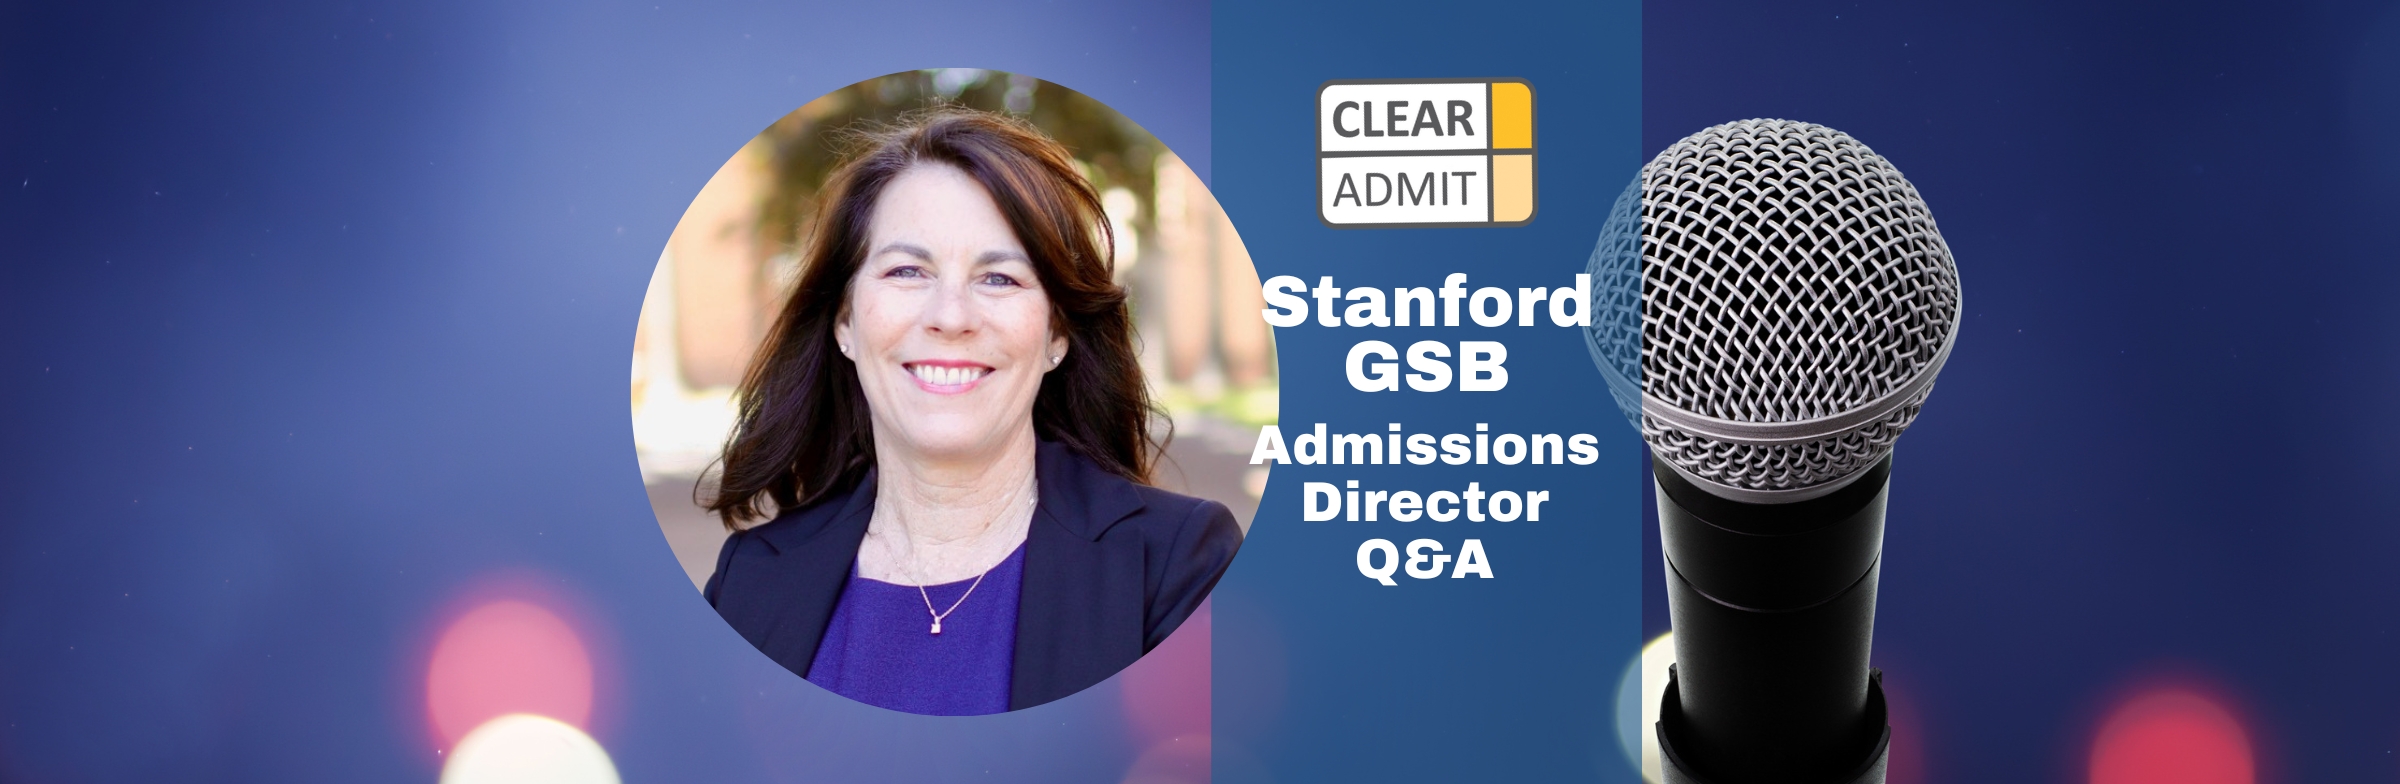 Image for Episode 314: Admissions Director Q&A with Jamie Schein of Stanford GSB